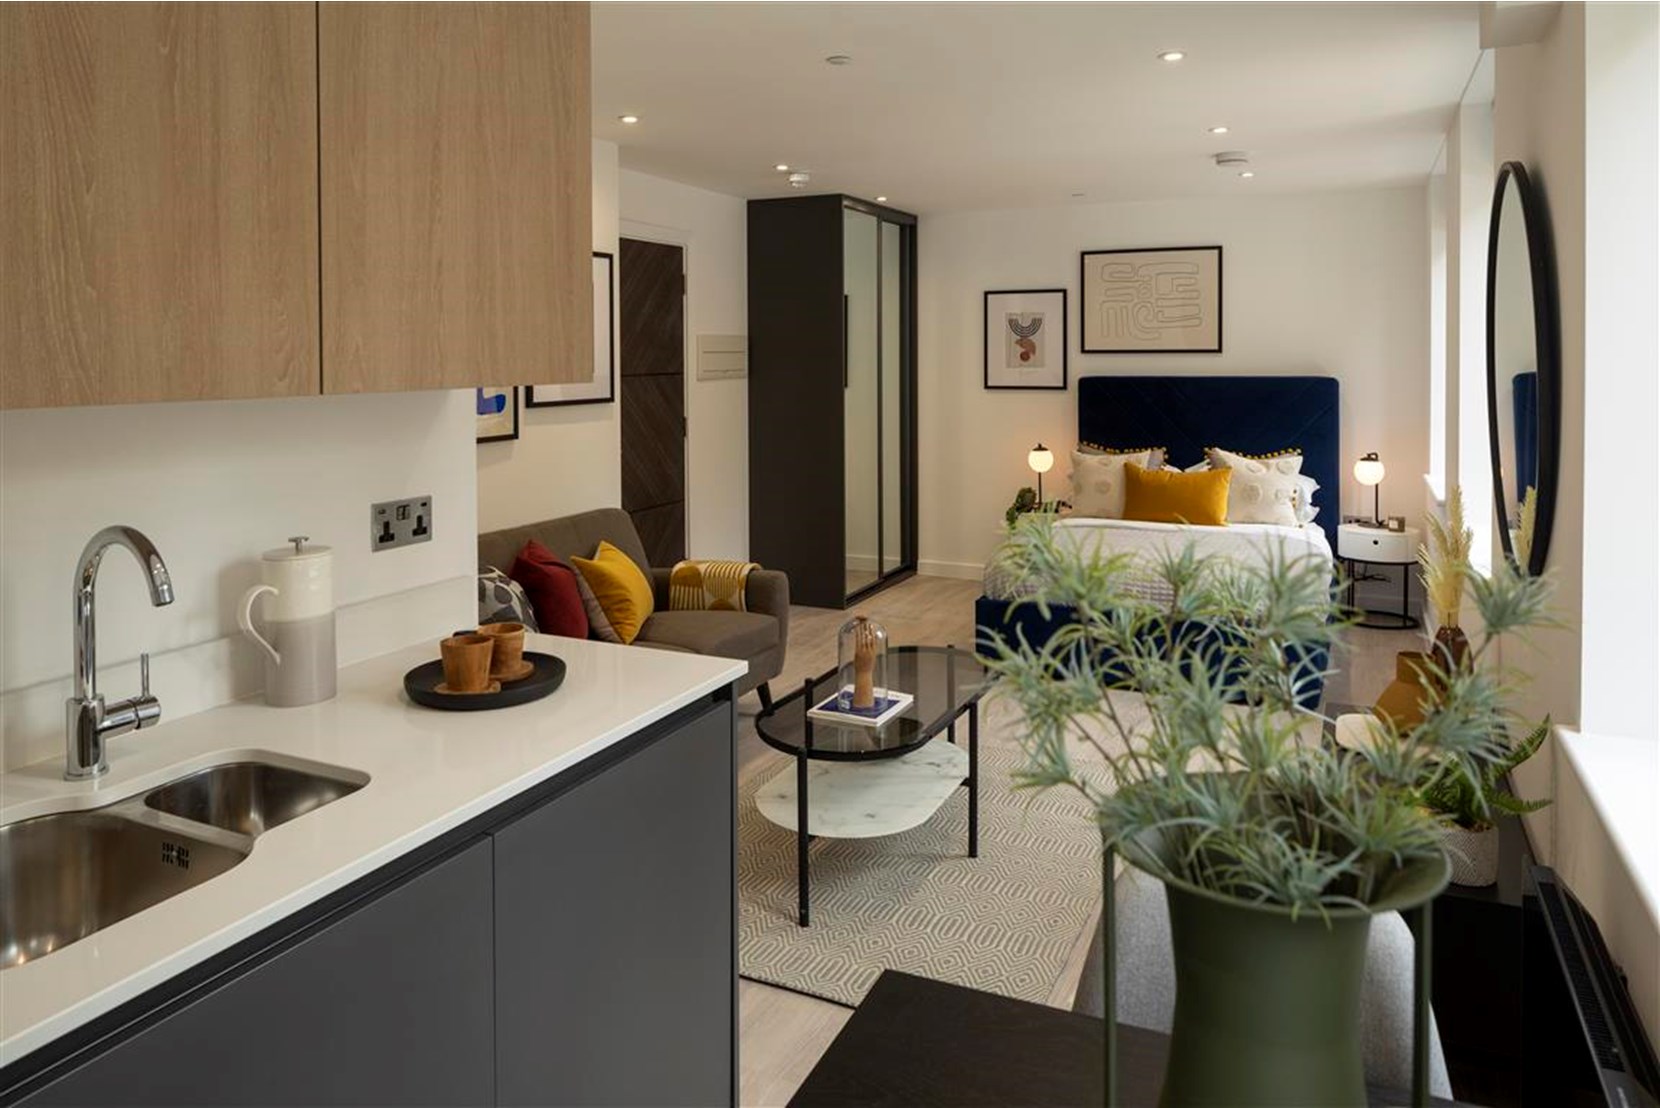 Apartments to Rent by JLL at Stratford Studios, Newham, E15, studio apartment